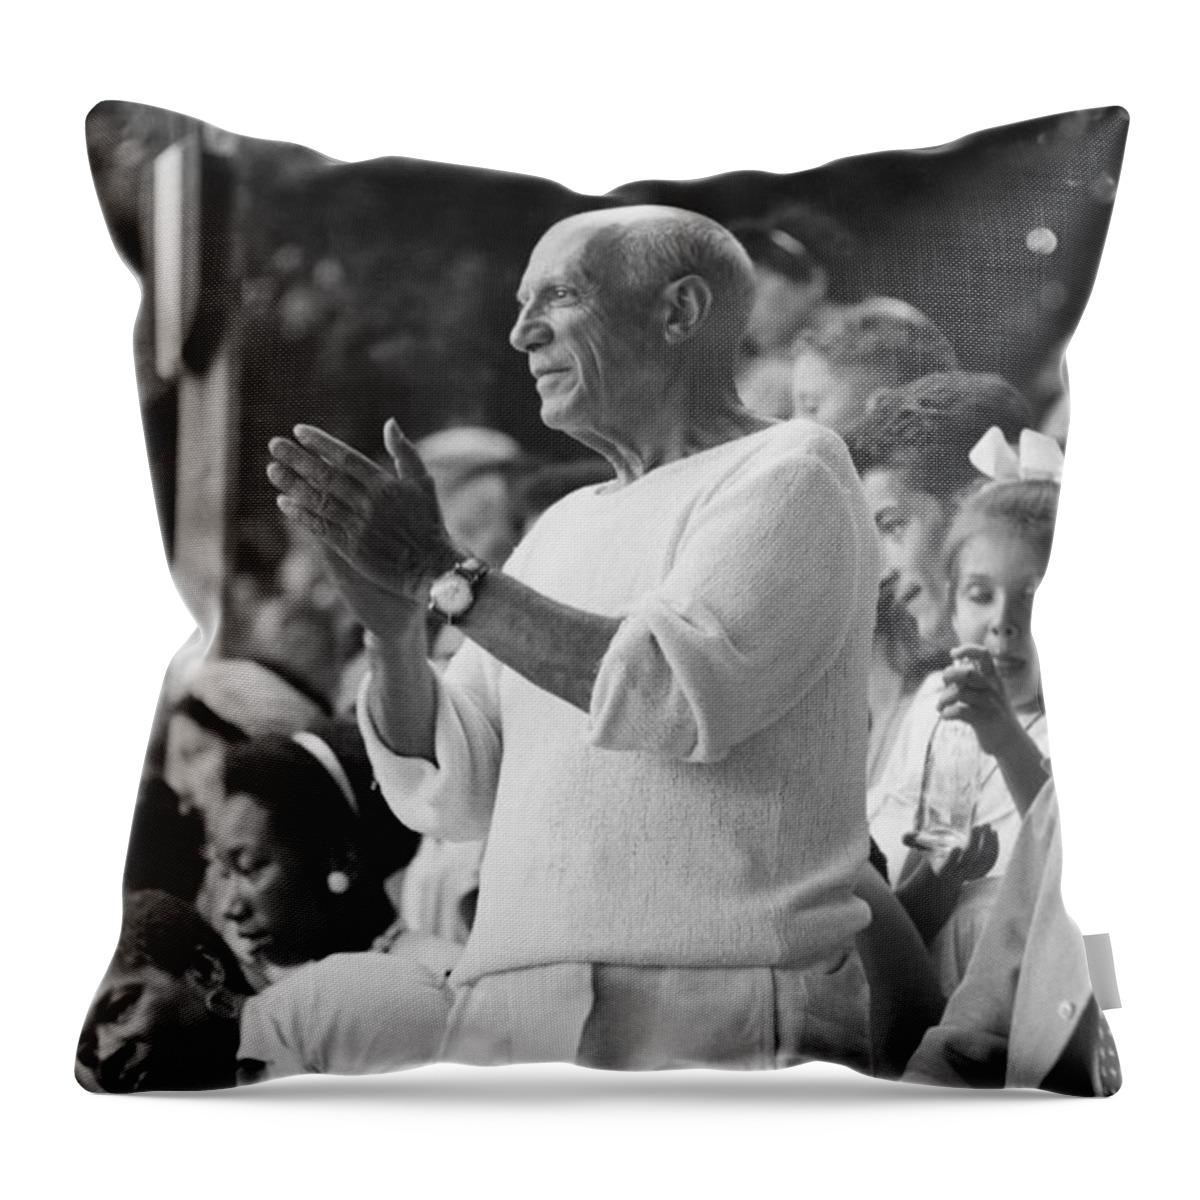 Art Throw Pillow featuring the photograph Picasso by Brian Brake